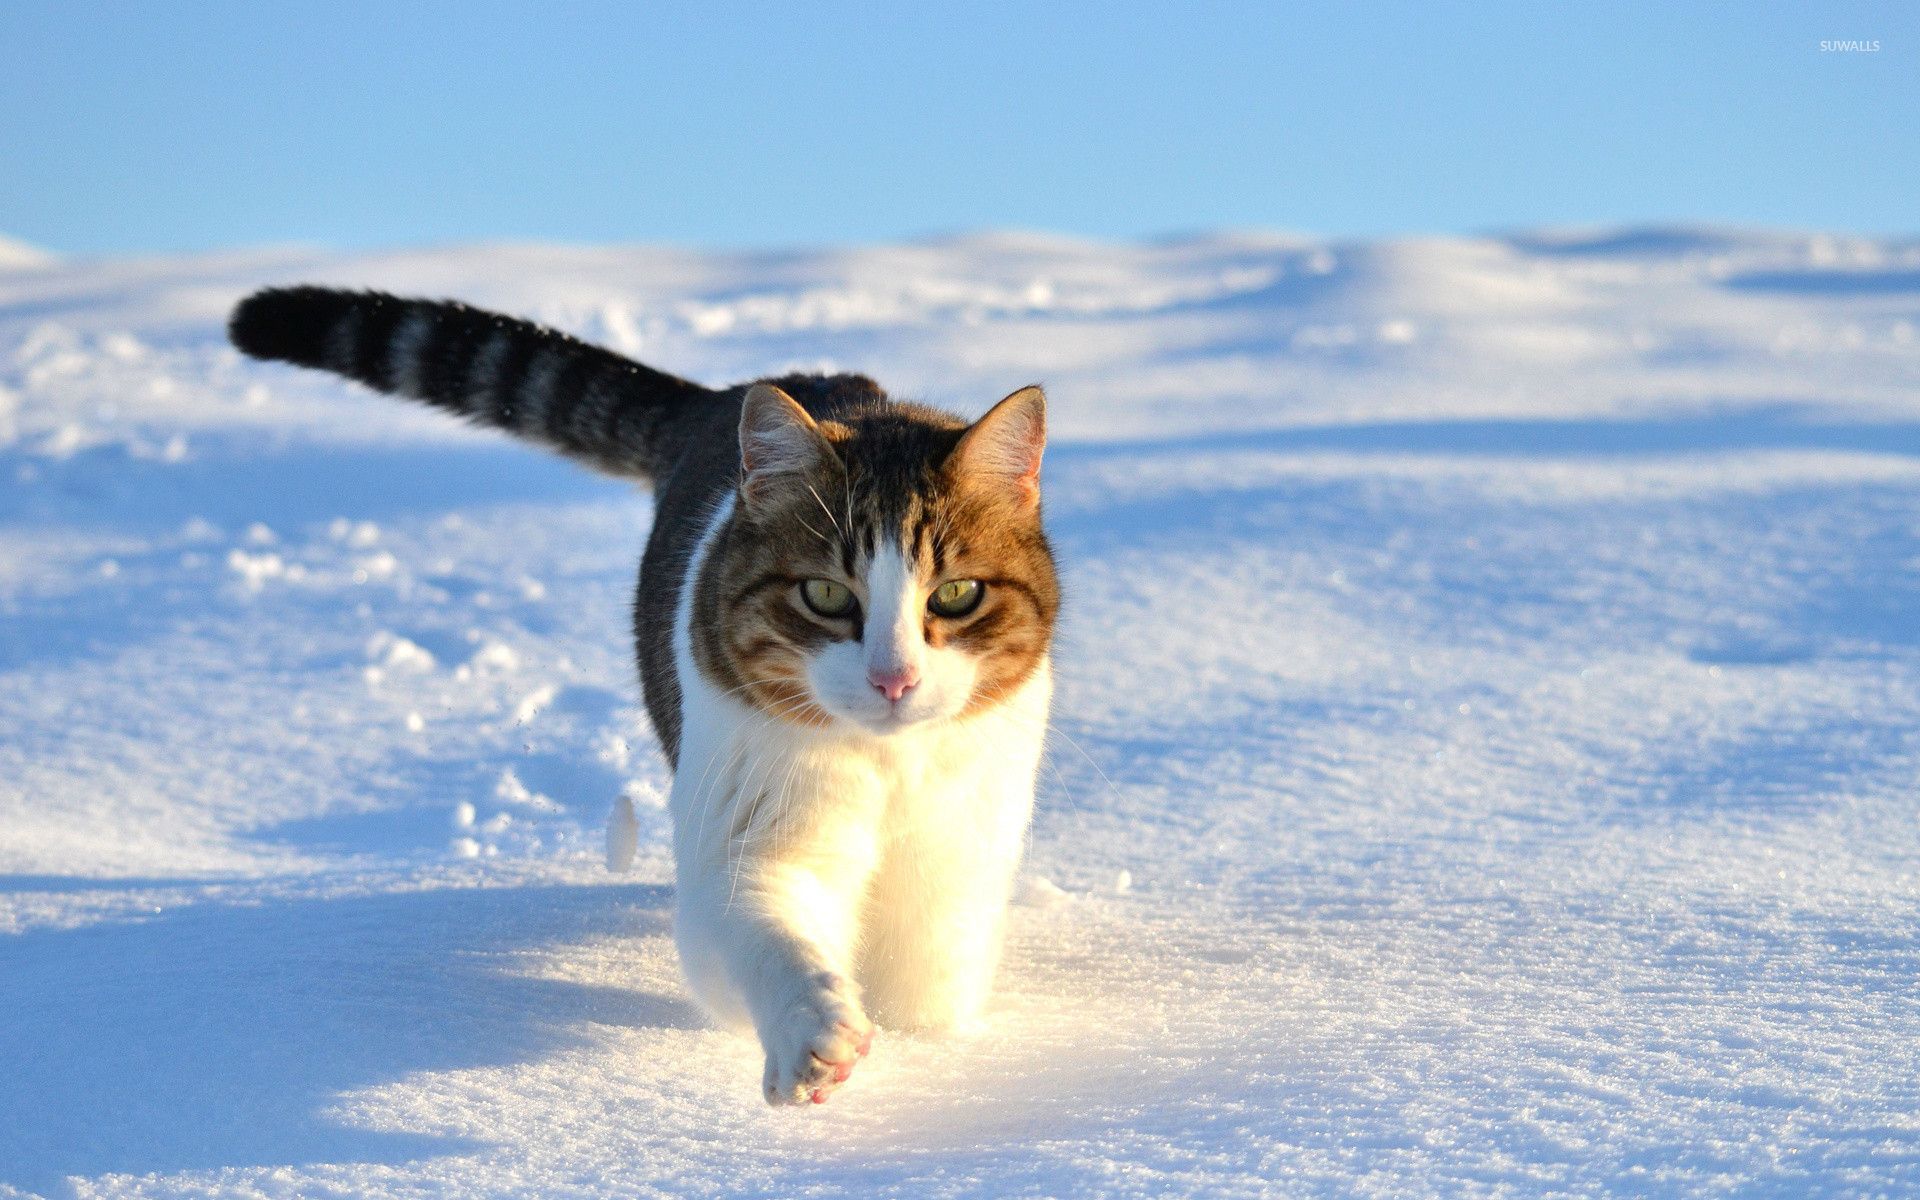 Cat walking in the snow wallpapers ...suwalls